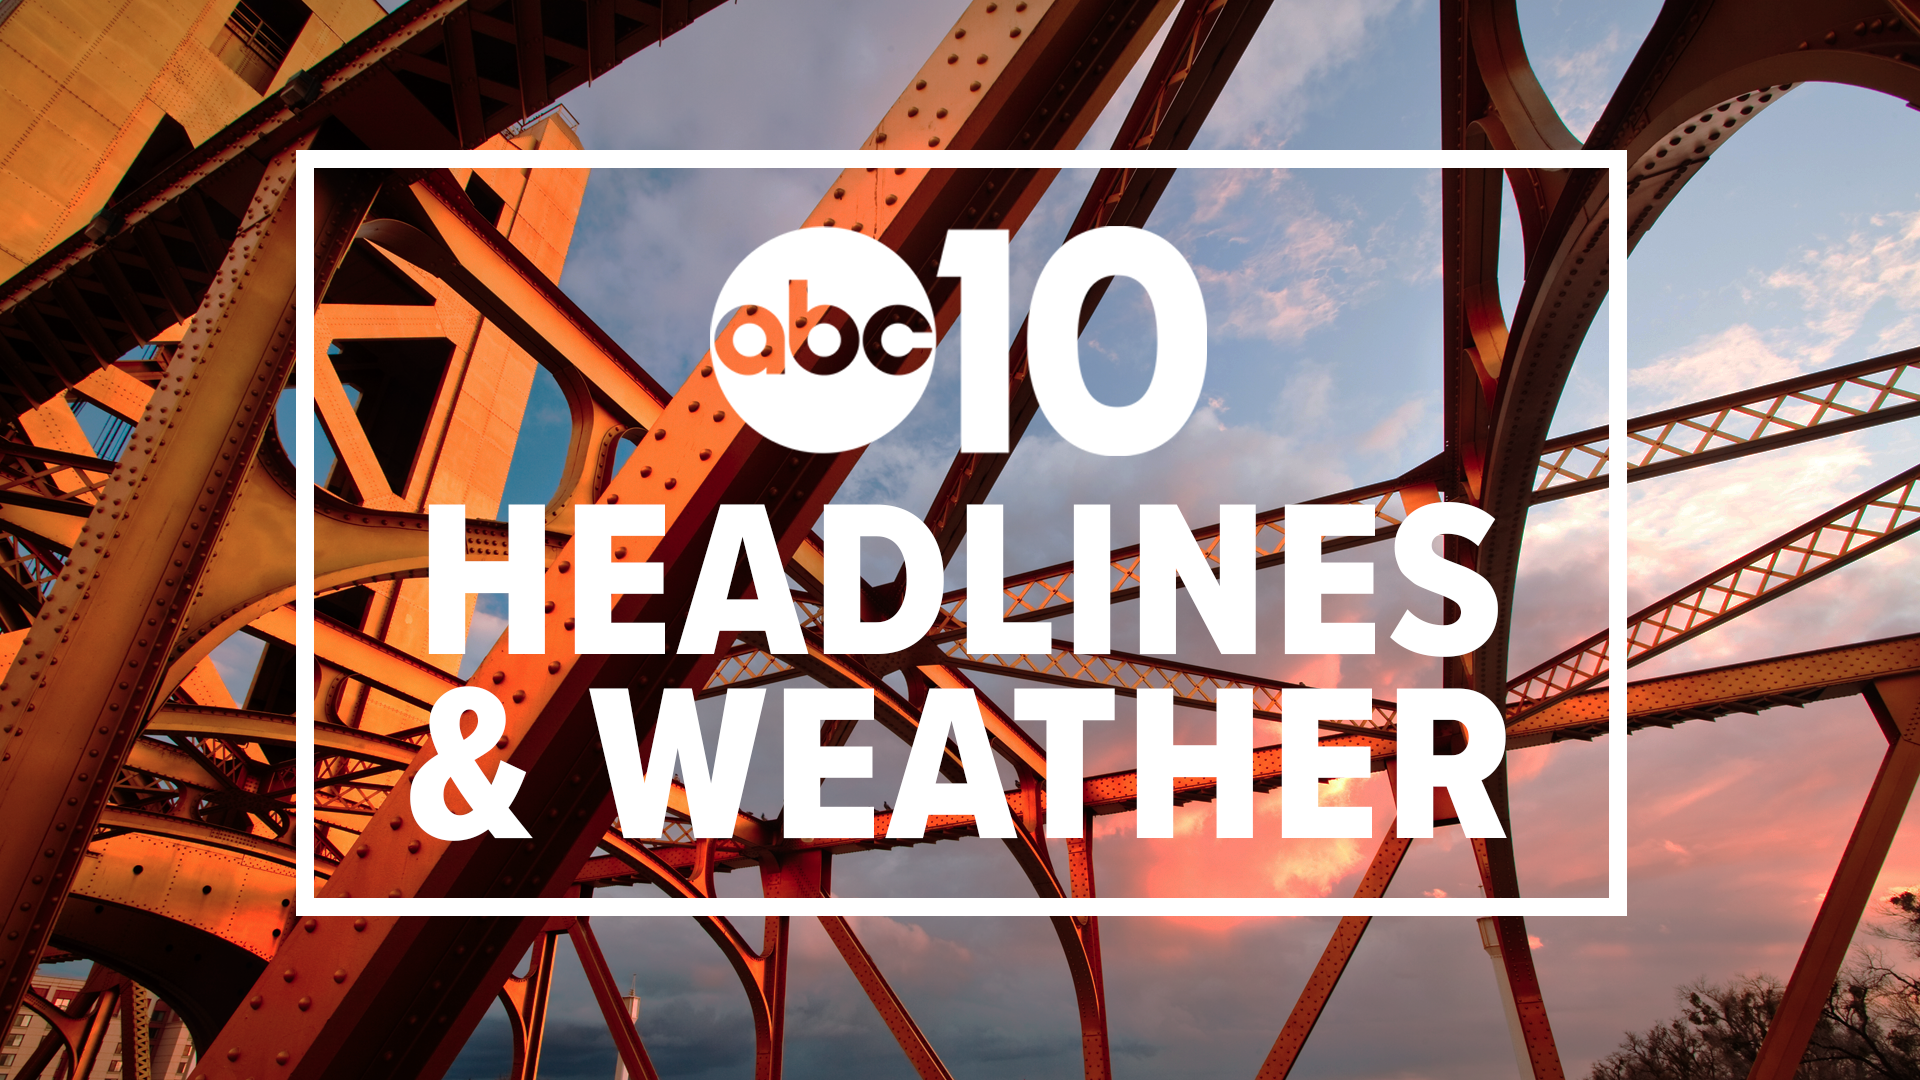 Morning Headlines: February 18, 2020 | Watch #MorningBlend10 weekdays at 5-7 a.m. and Morning Blend's #ExtraShot at 11 a.m. for everything you need to know!